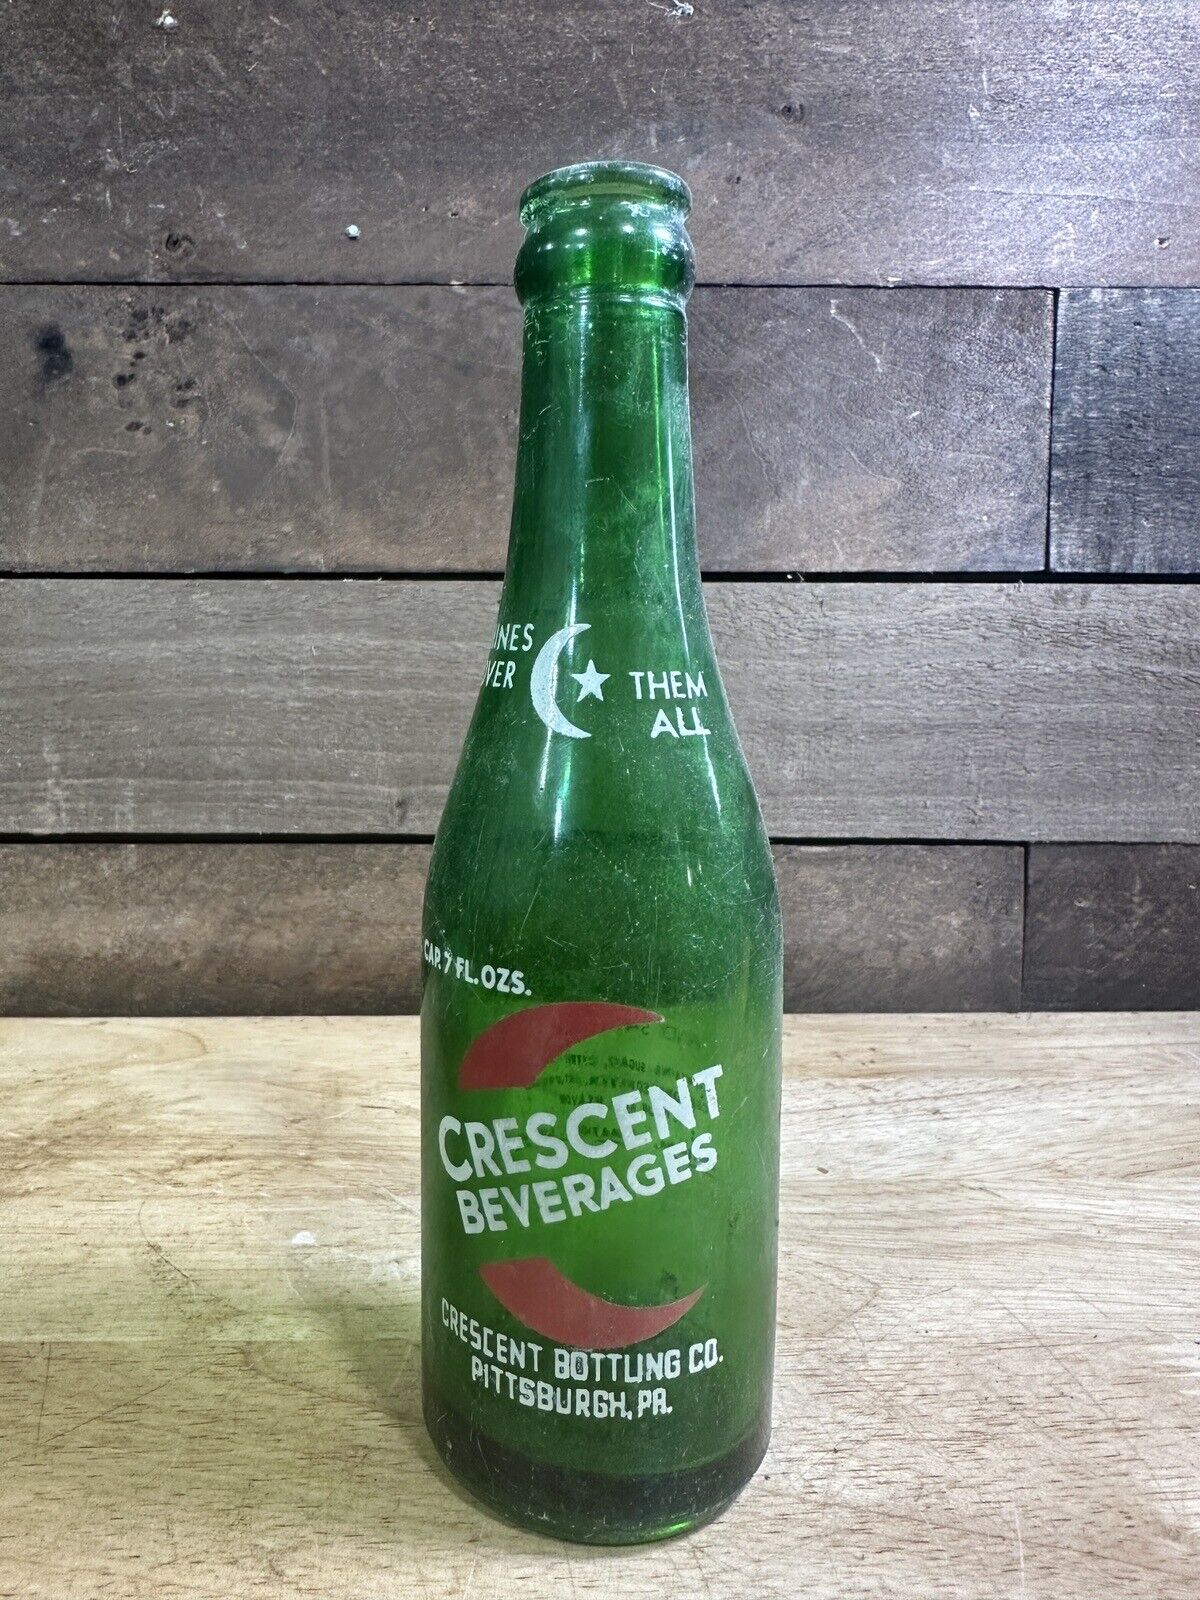 VINTAGE CRESCENT BEVERAGES ACL SODA BOTTLE PITTSBURGH PA PINTED LABEL MOON STAR